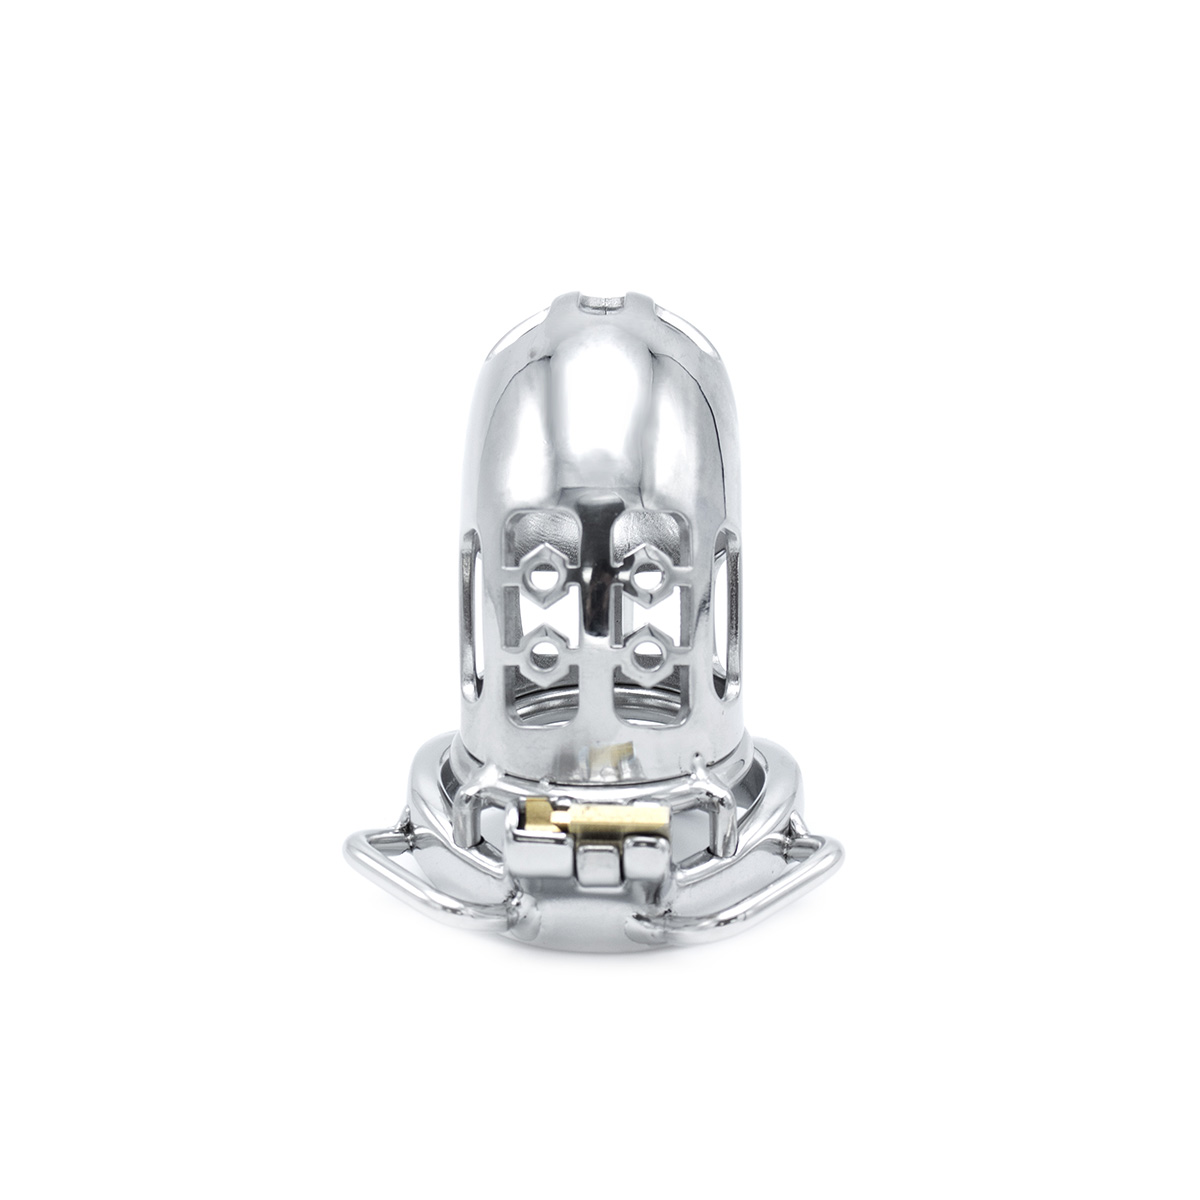 Belted-Chastity-Device-with-Ball-Divider-OPR-278014-5